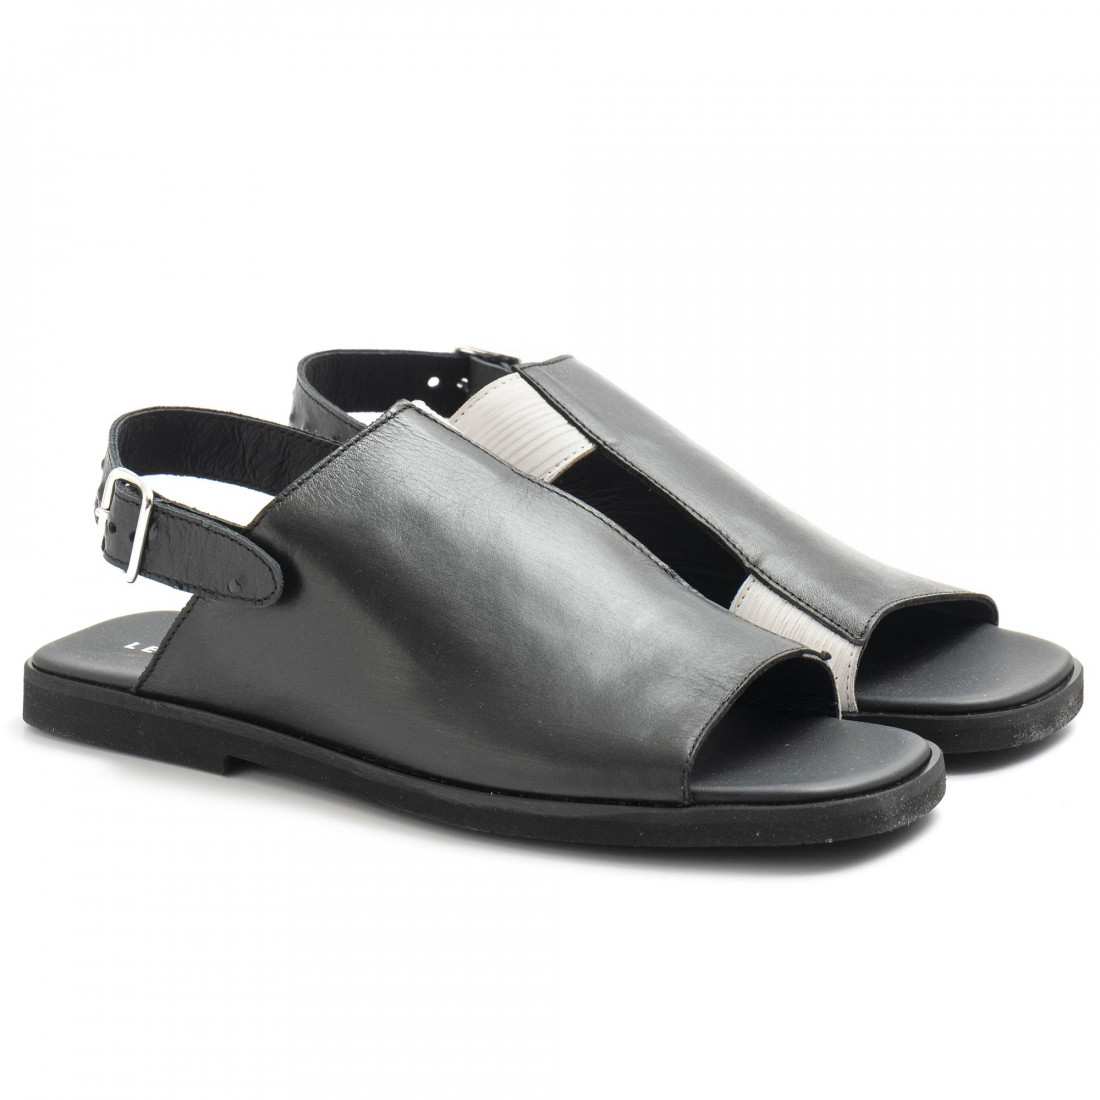 Le Bohemien women's sandal in black and white leather